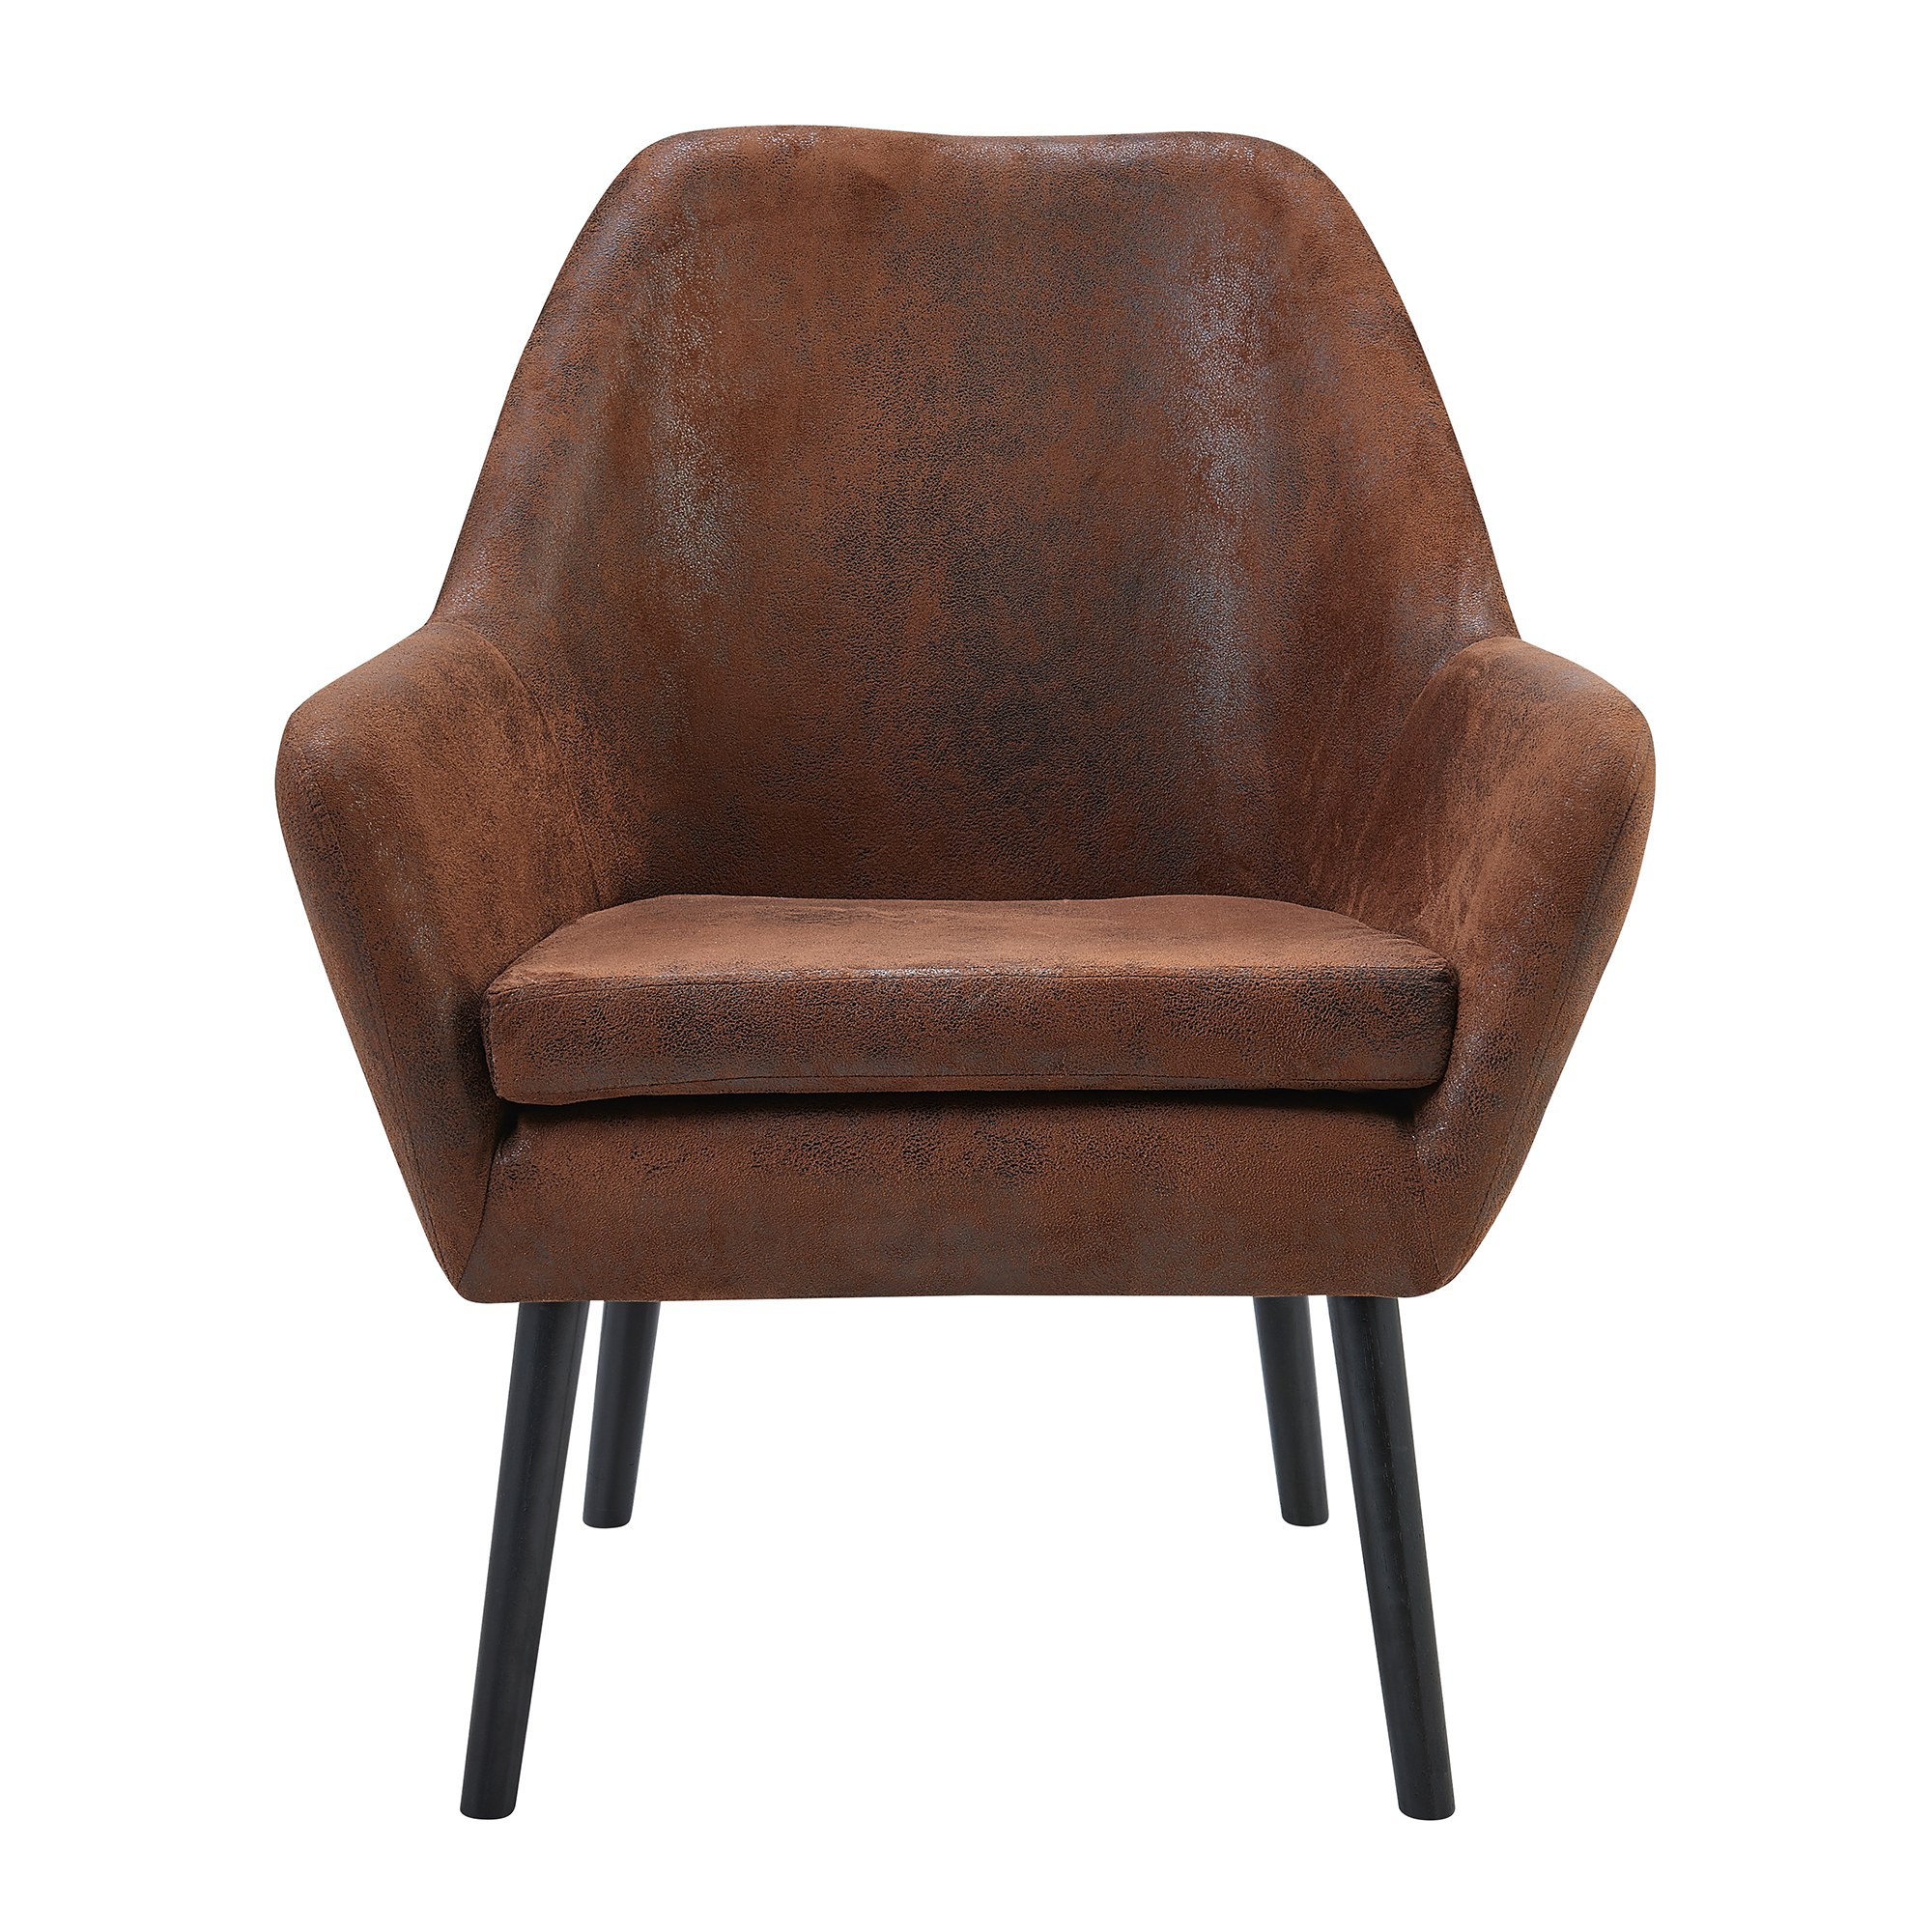 Teamson Home Divano Armchair with Aged Fabric, Brown